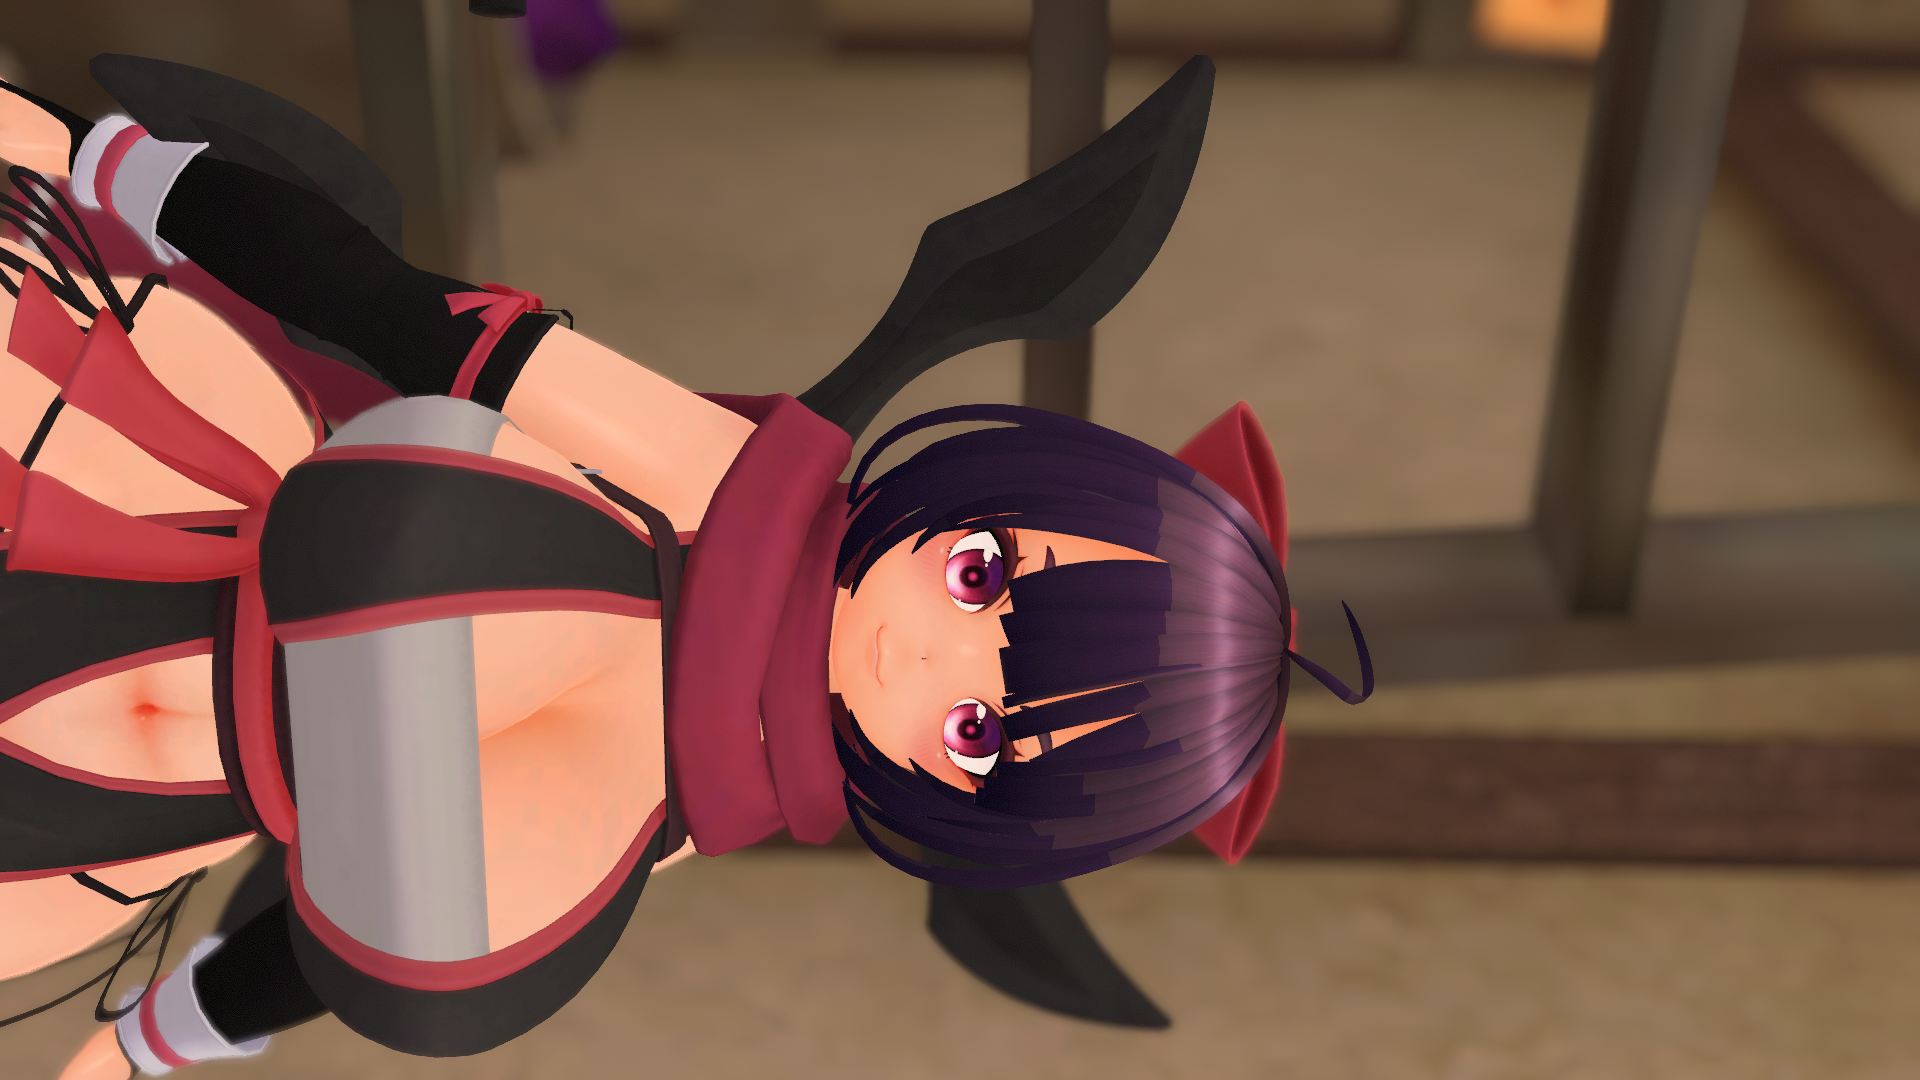 VRChat_1920x1080_2021-12-05_05-37-01.691.png